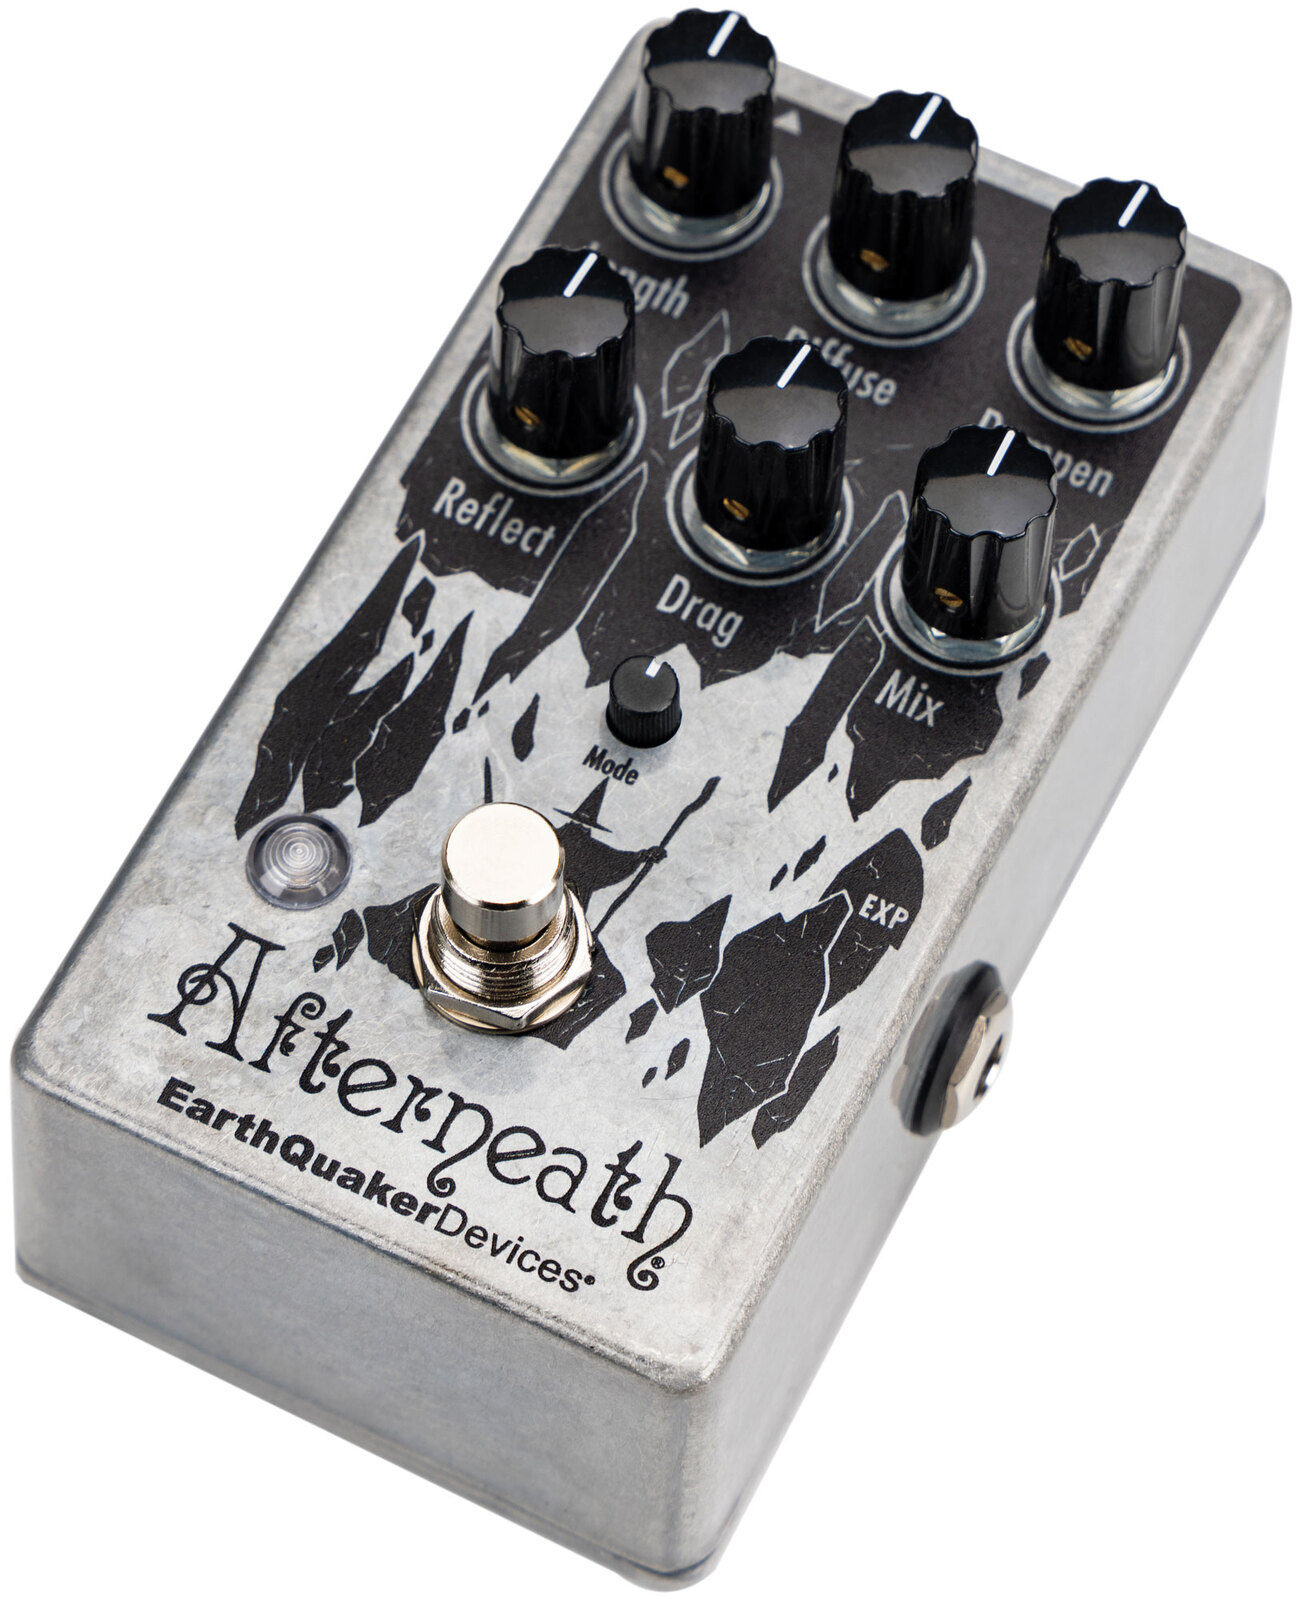 EarthQuaker Devices Afterneath v3 Retrospective